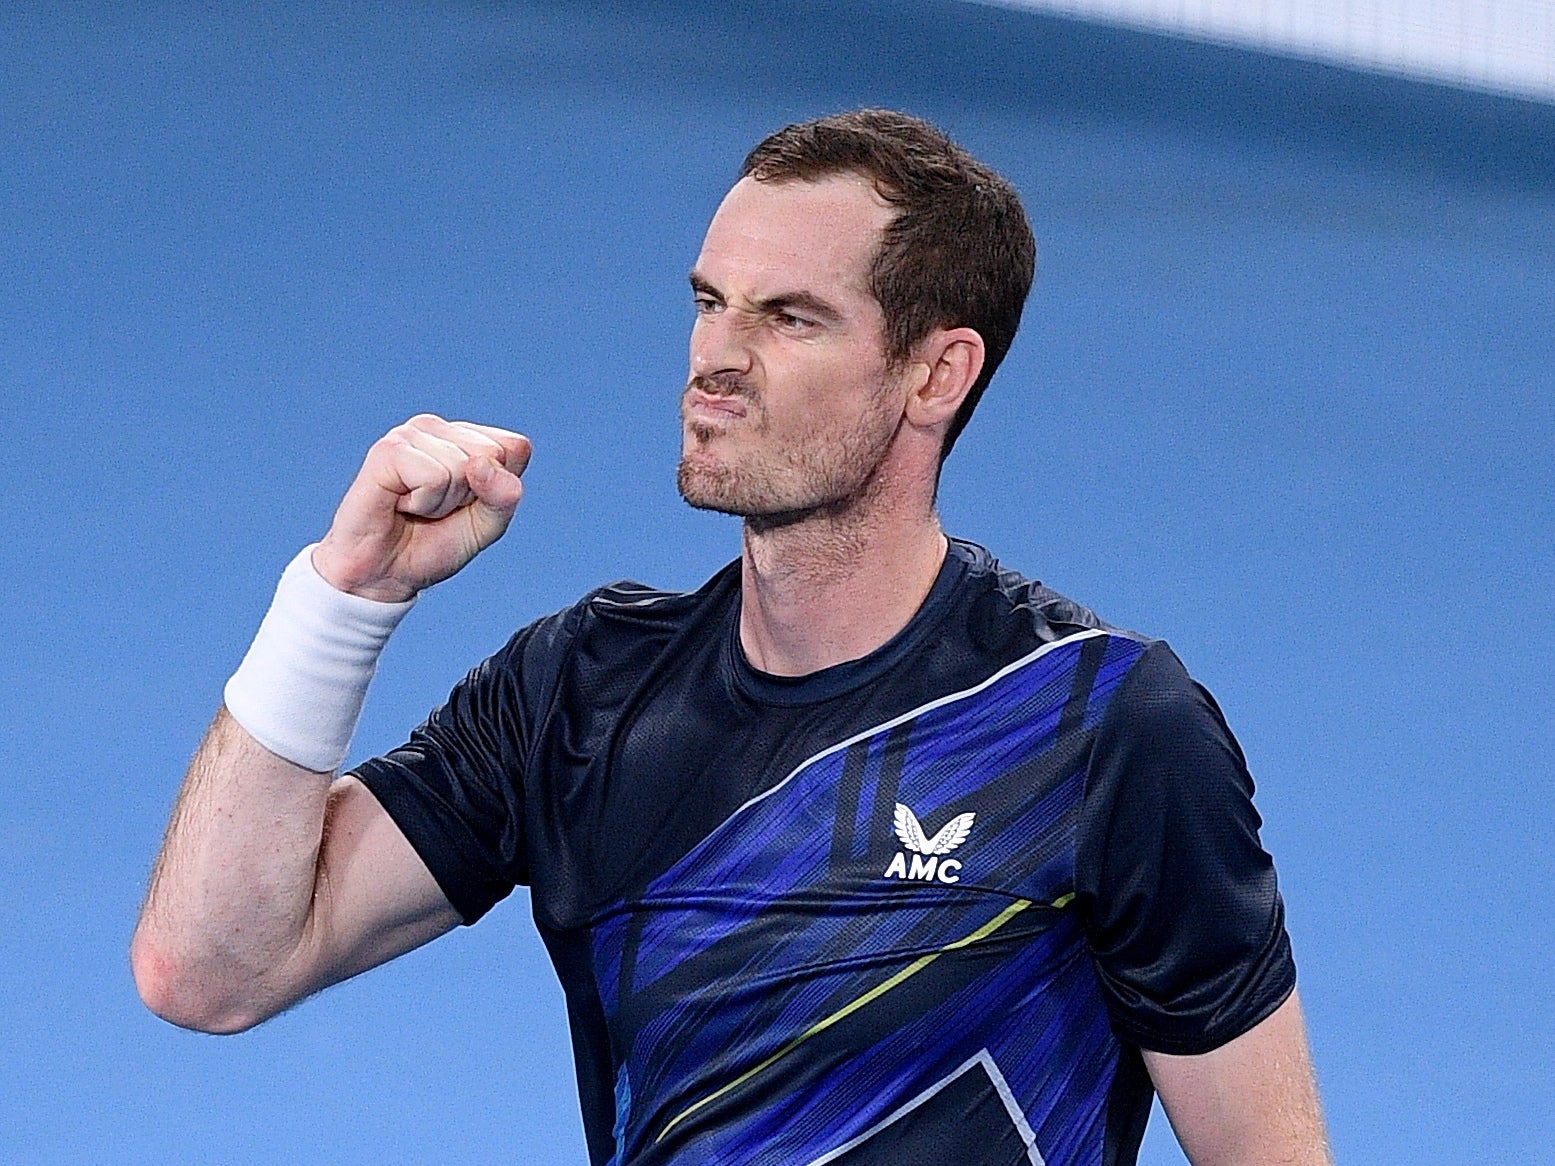 Murray prevailed 6-7 (4) 7-6 (3) 6-3